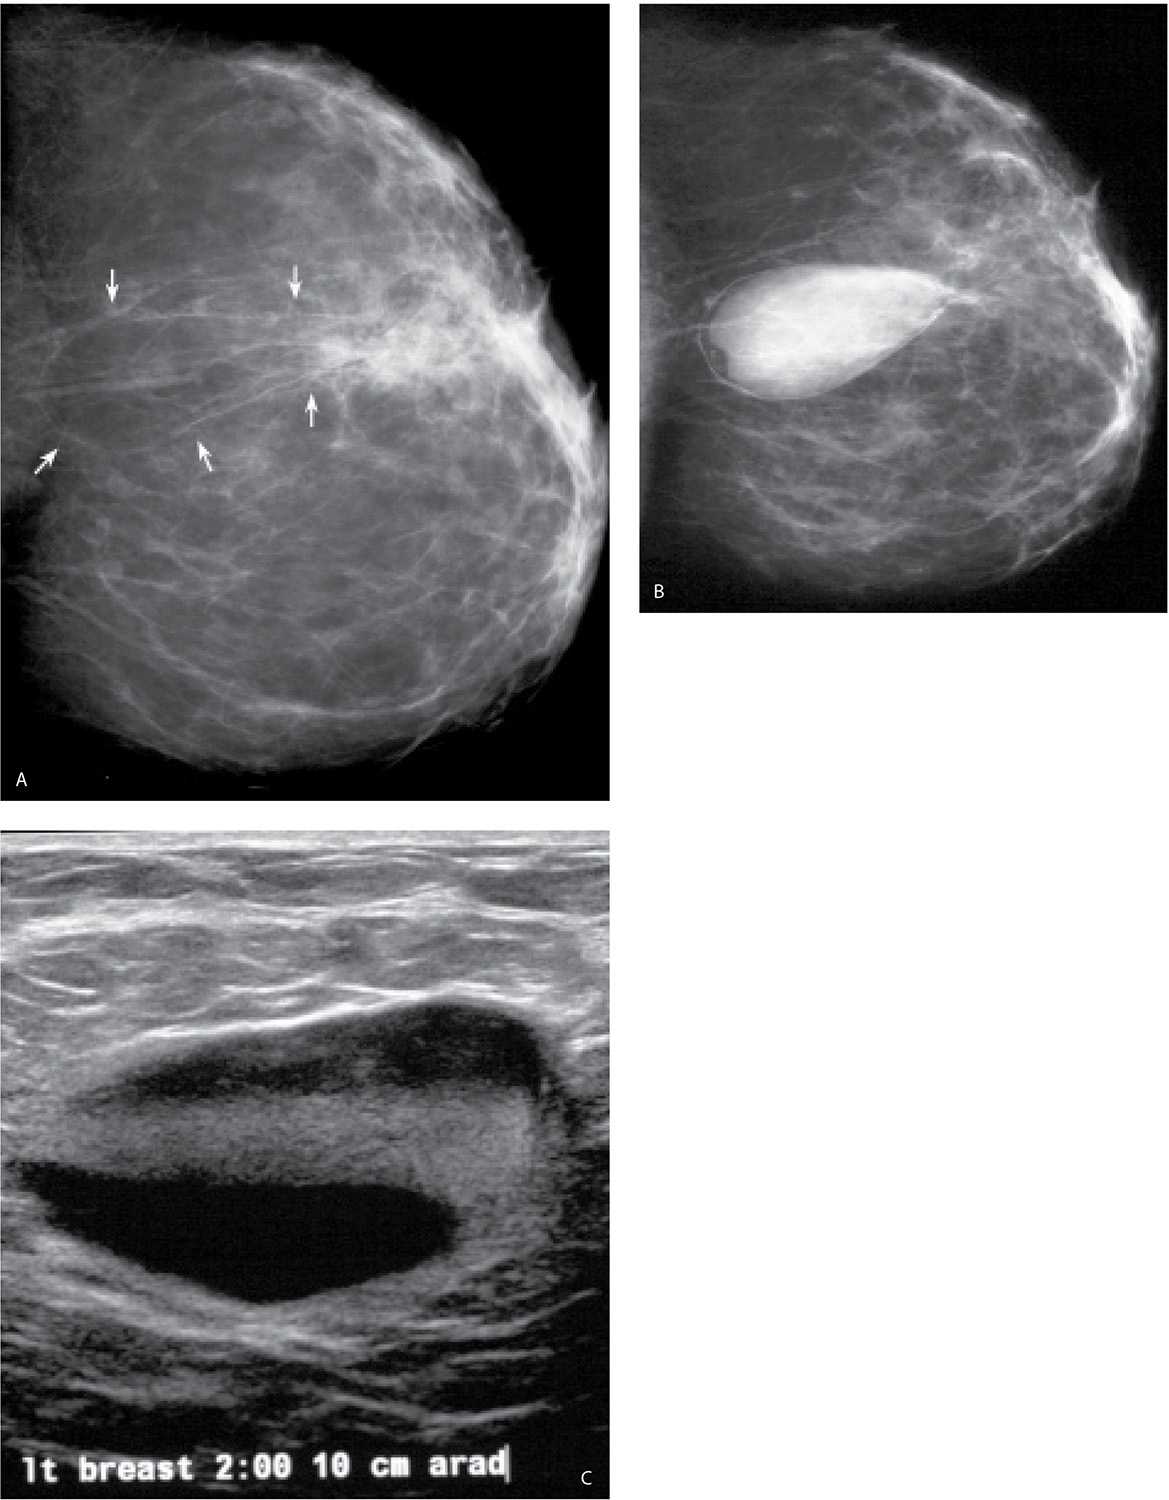 Comparison of the breast mass with the craniocaudal (CC) and